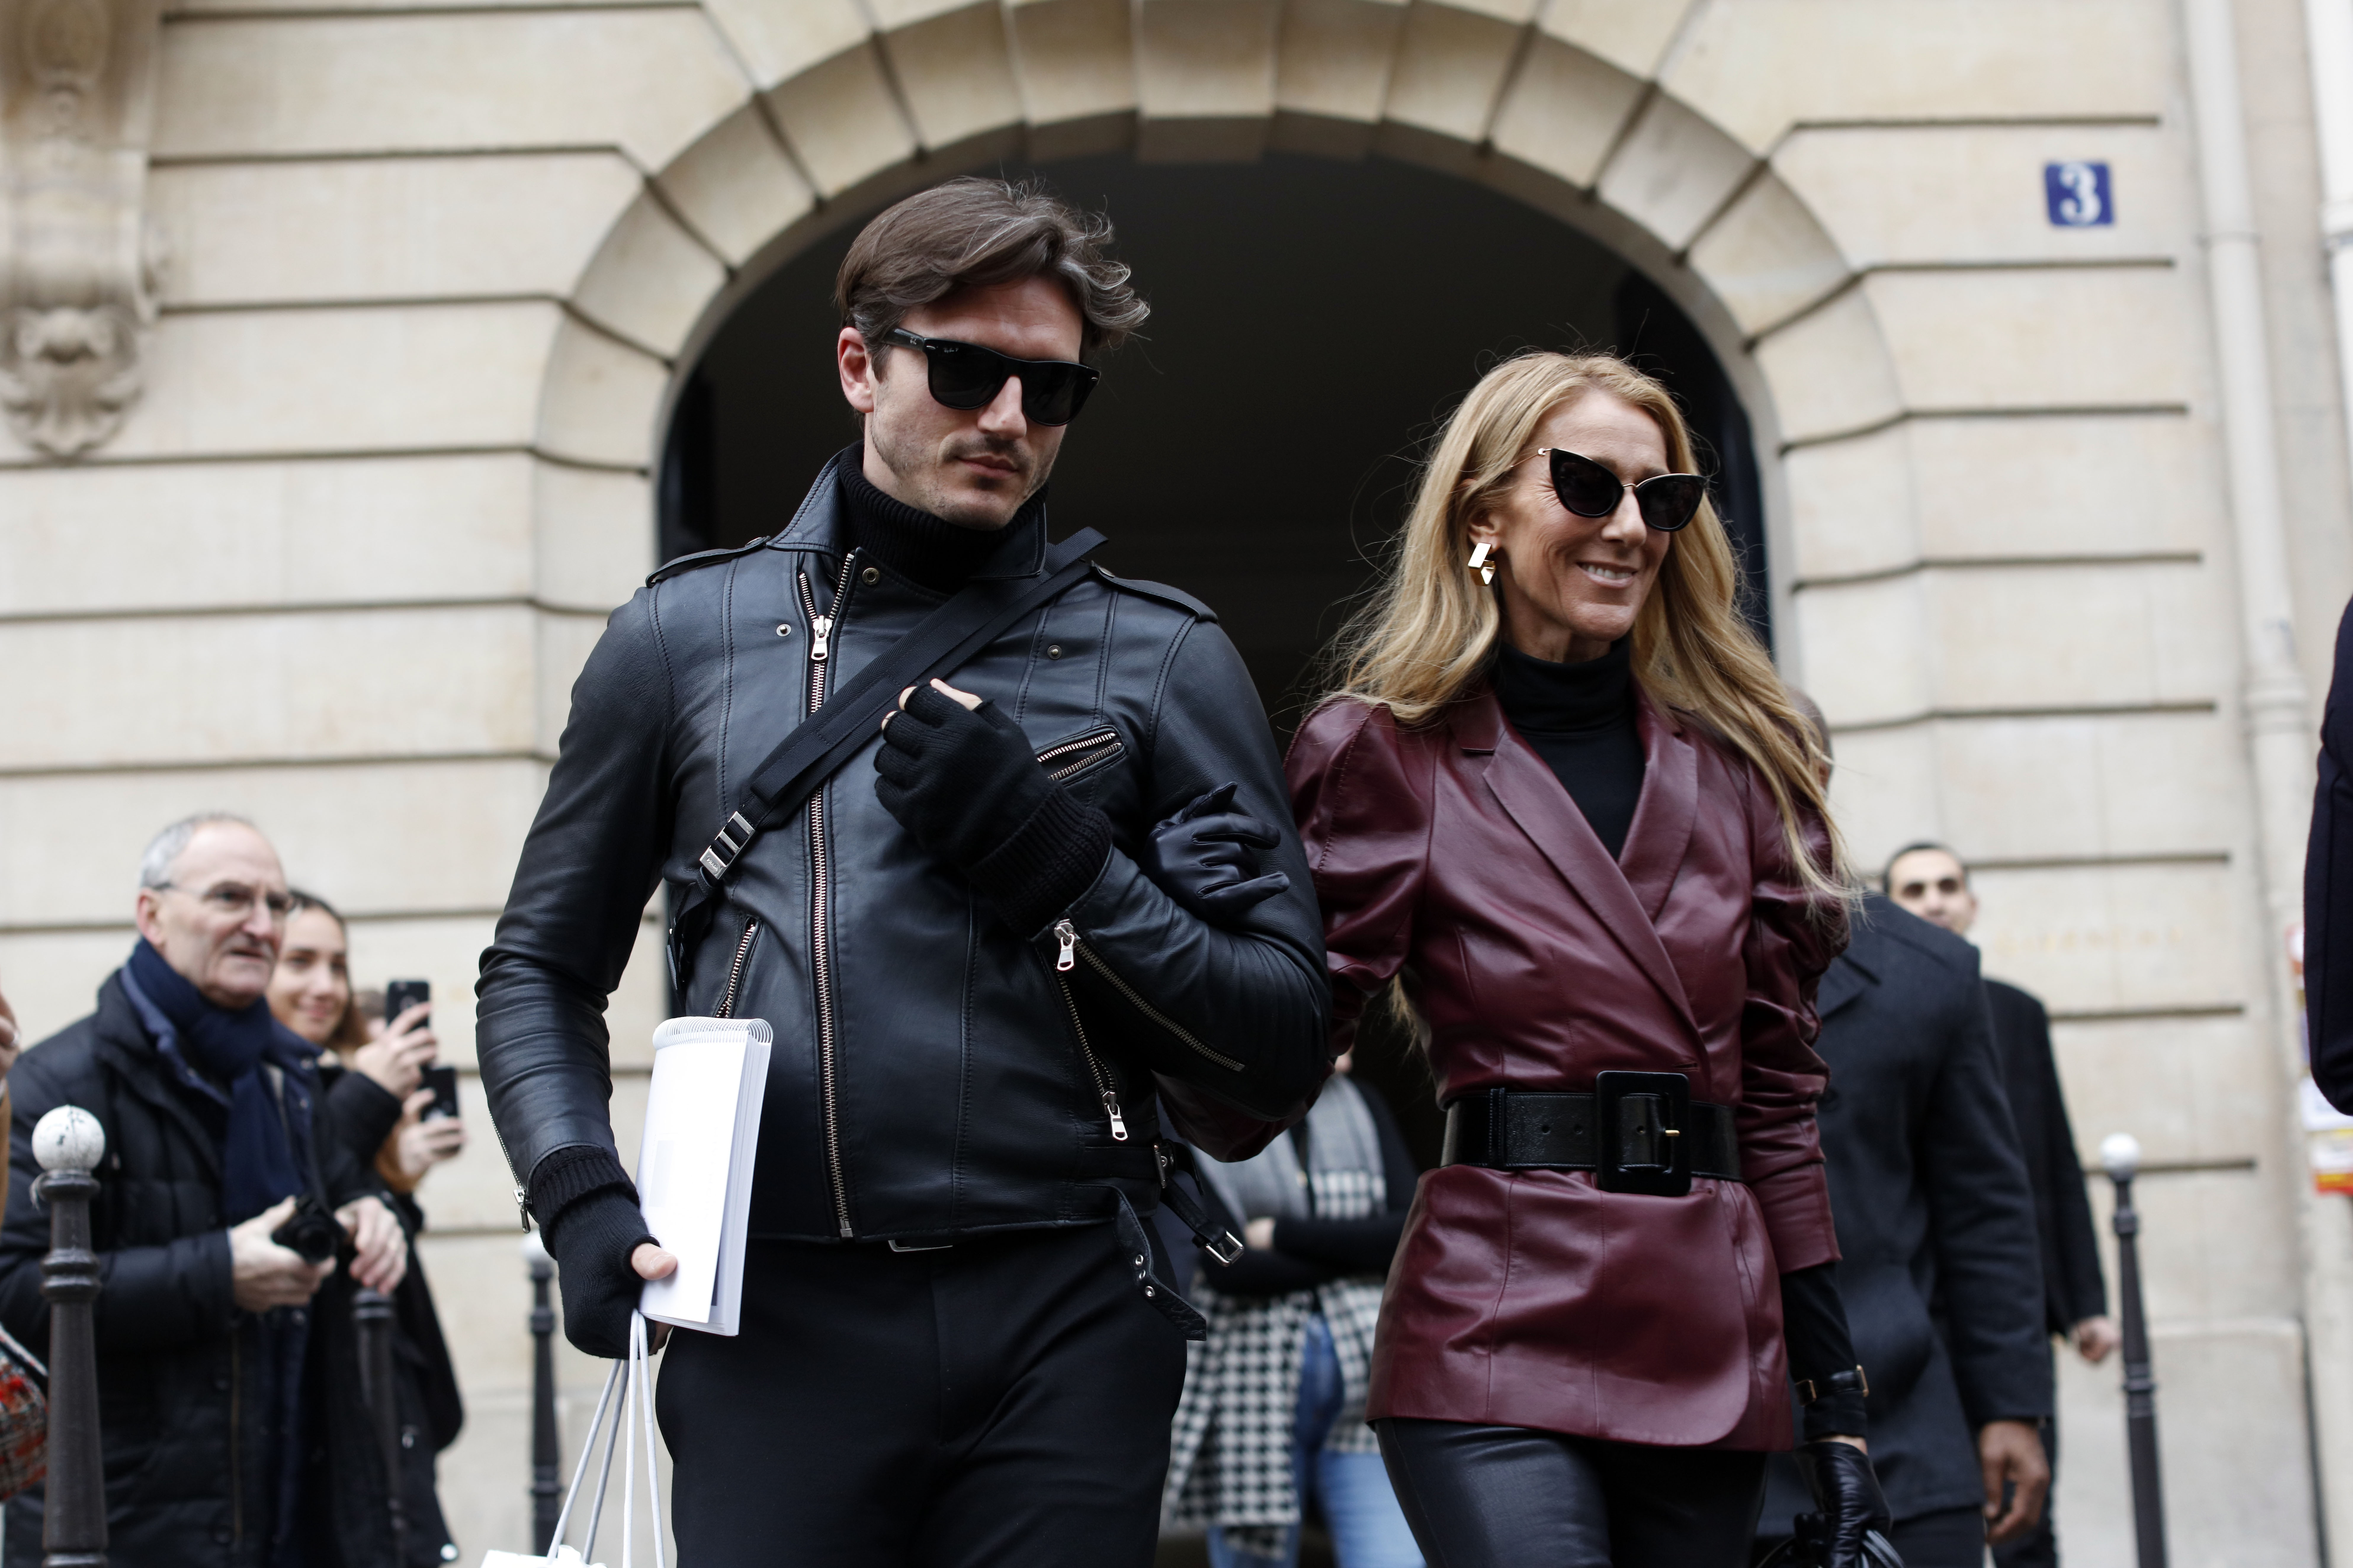 Celine Dion and Pepe Munoz seen leaving the GIVENCHY office building on January 24, 2019 in Paris, France. | Source: Getty Images